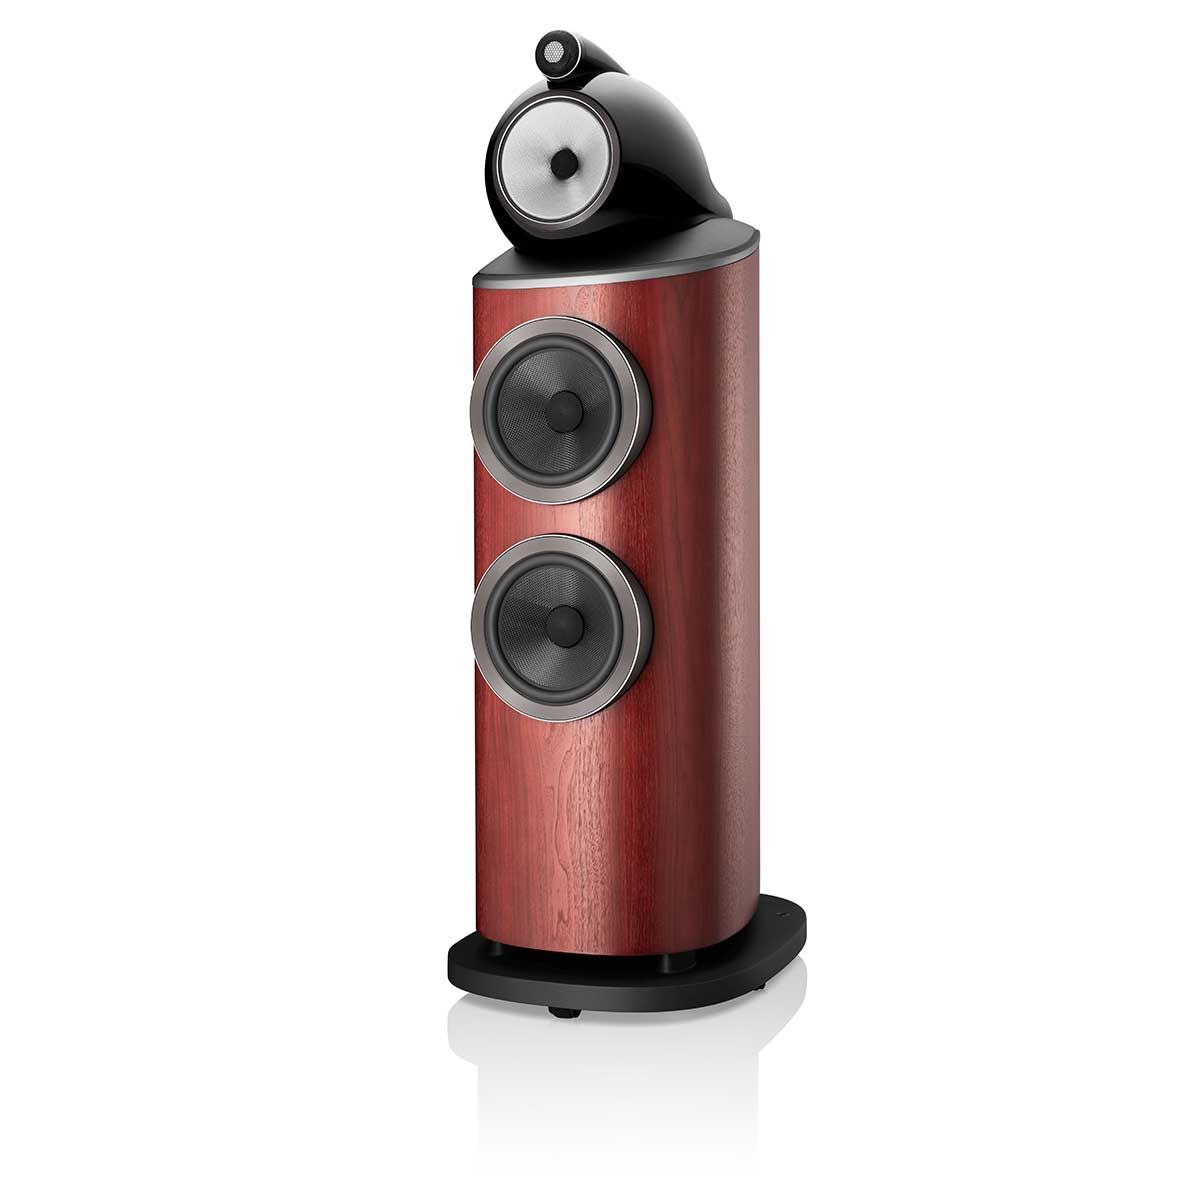 Bowers & Wilkins 802 D4 Floorstanding Speaker, Satin Rosenut, front angle without grille